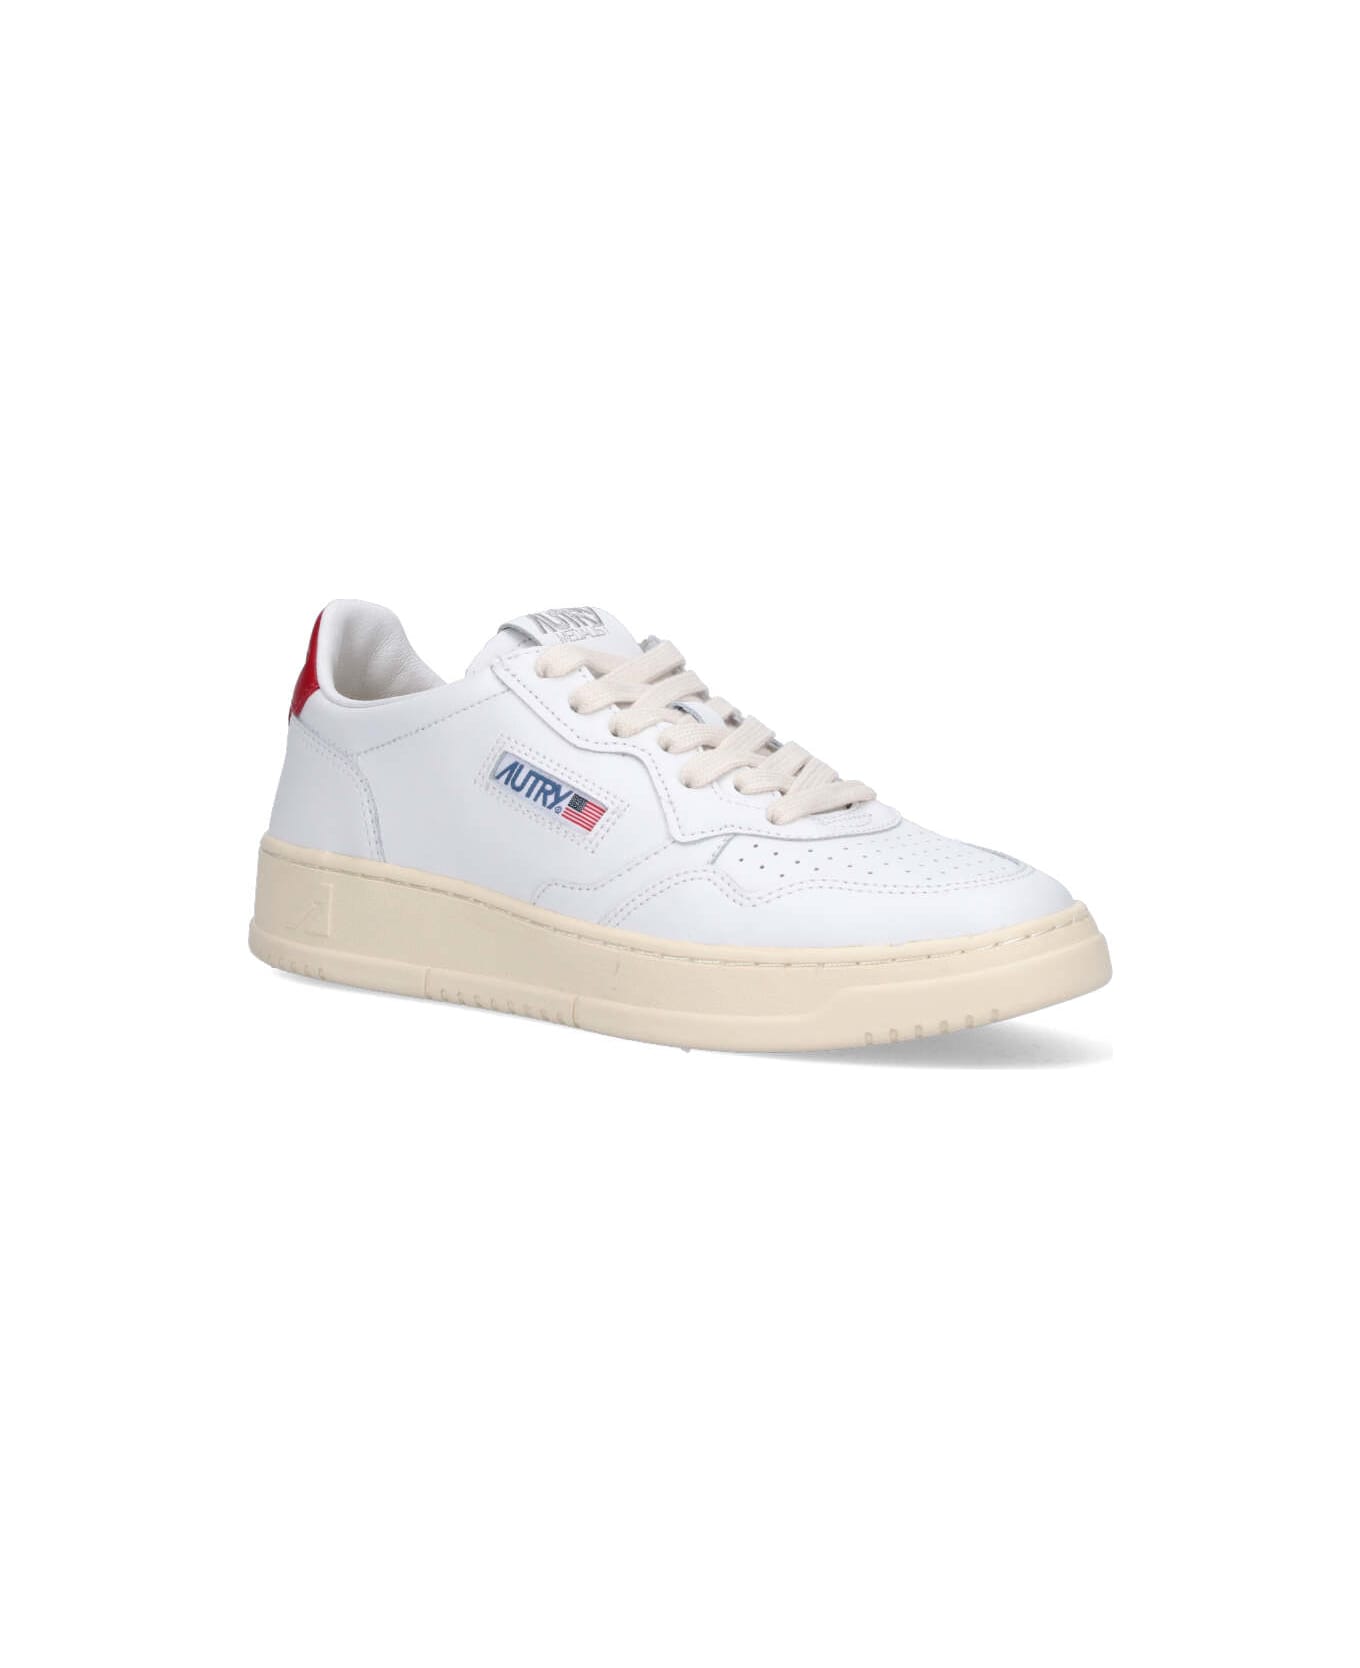 Autry Low Sneakers 'medalist' - White Red